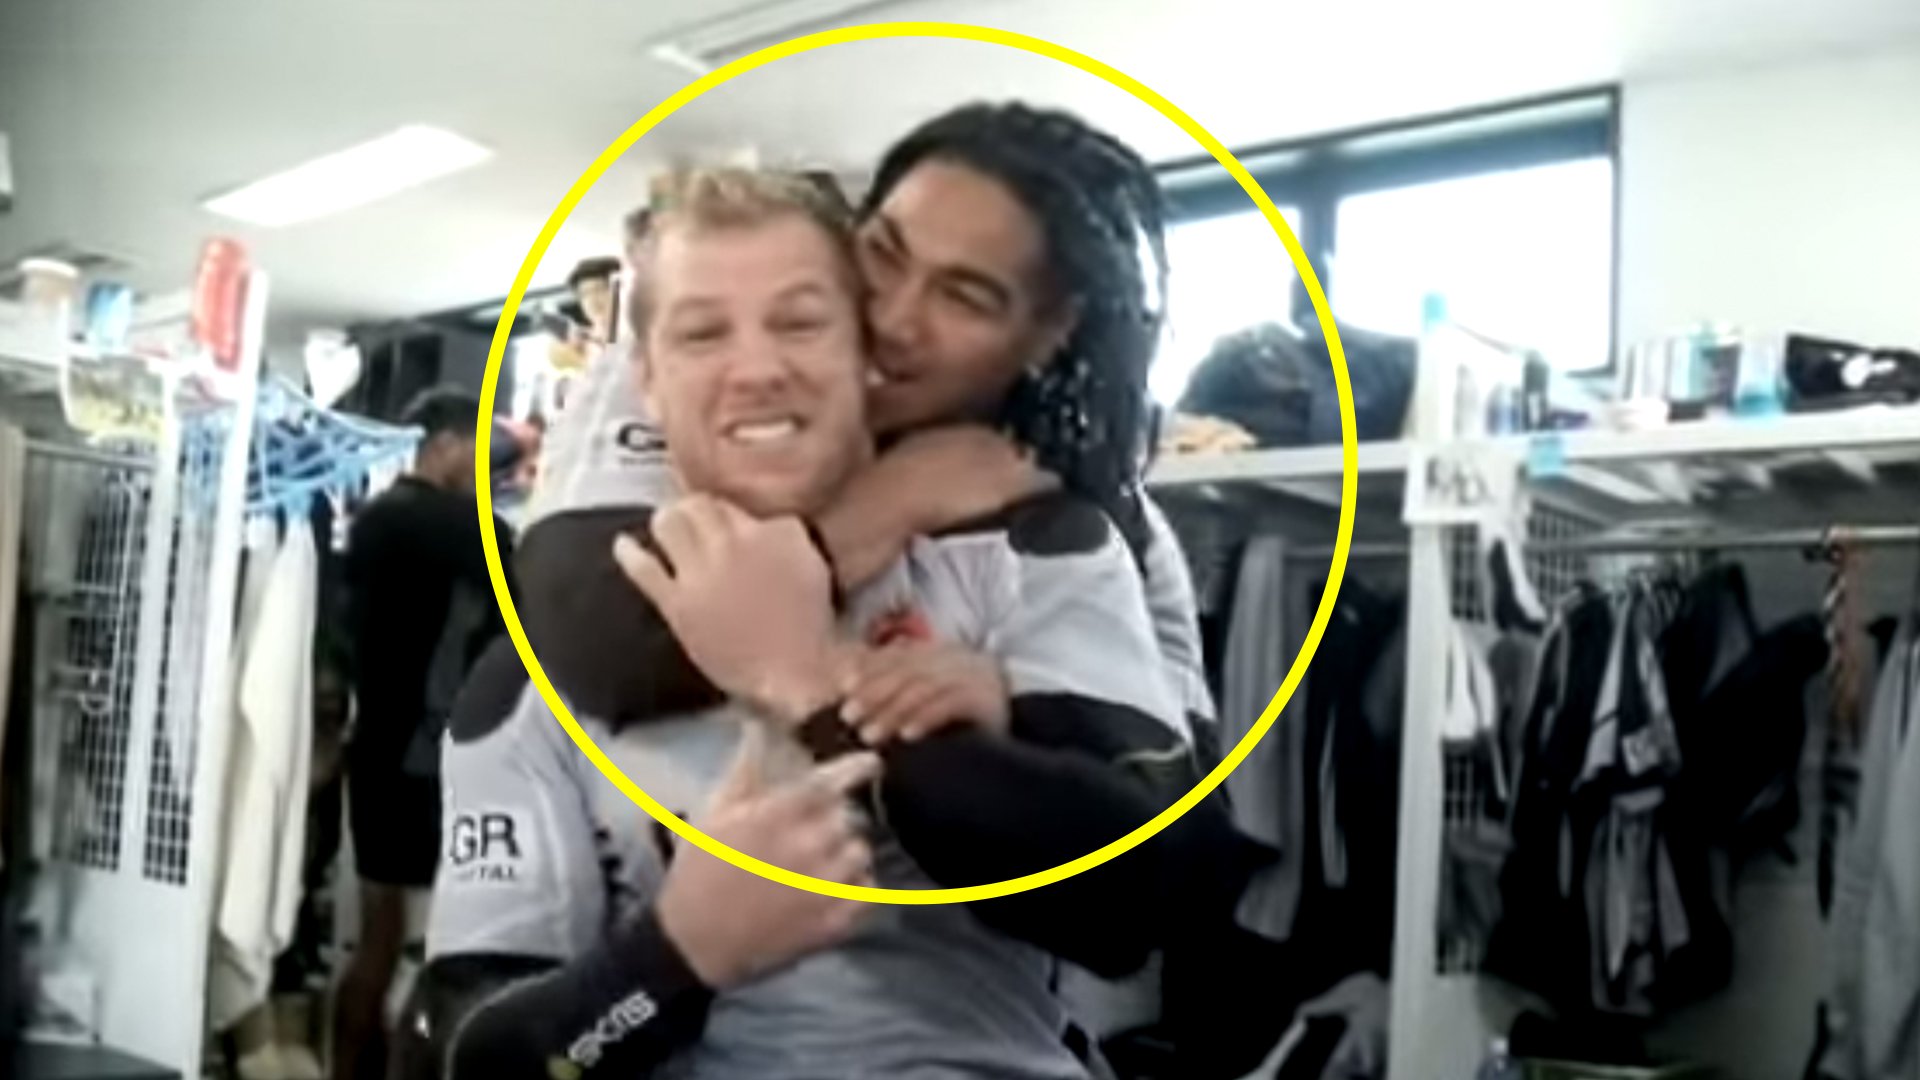 Ma'a Nonu and James Haskell once had a serious bromance